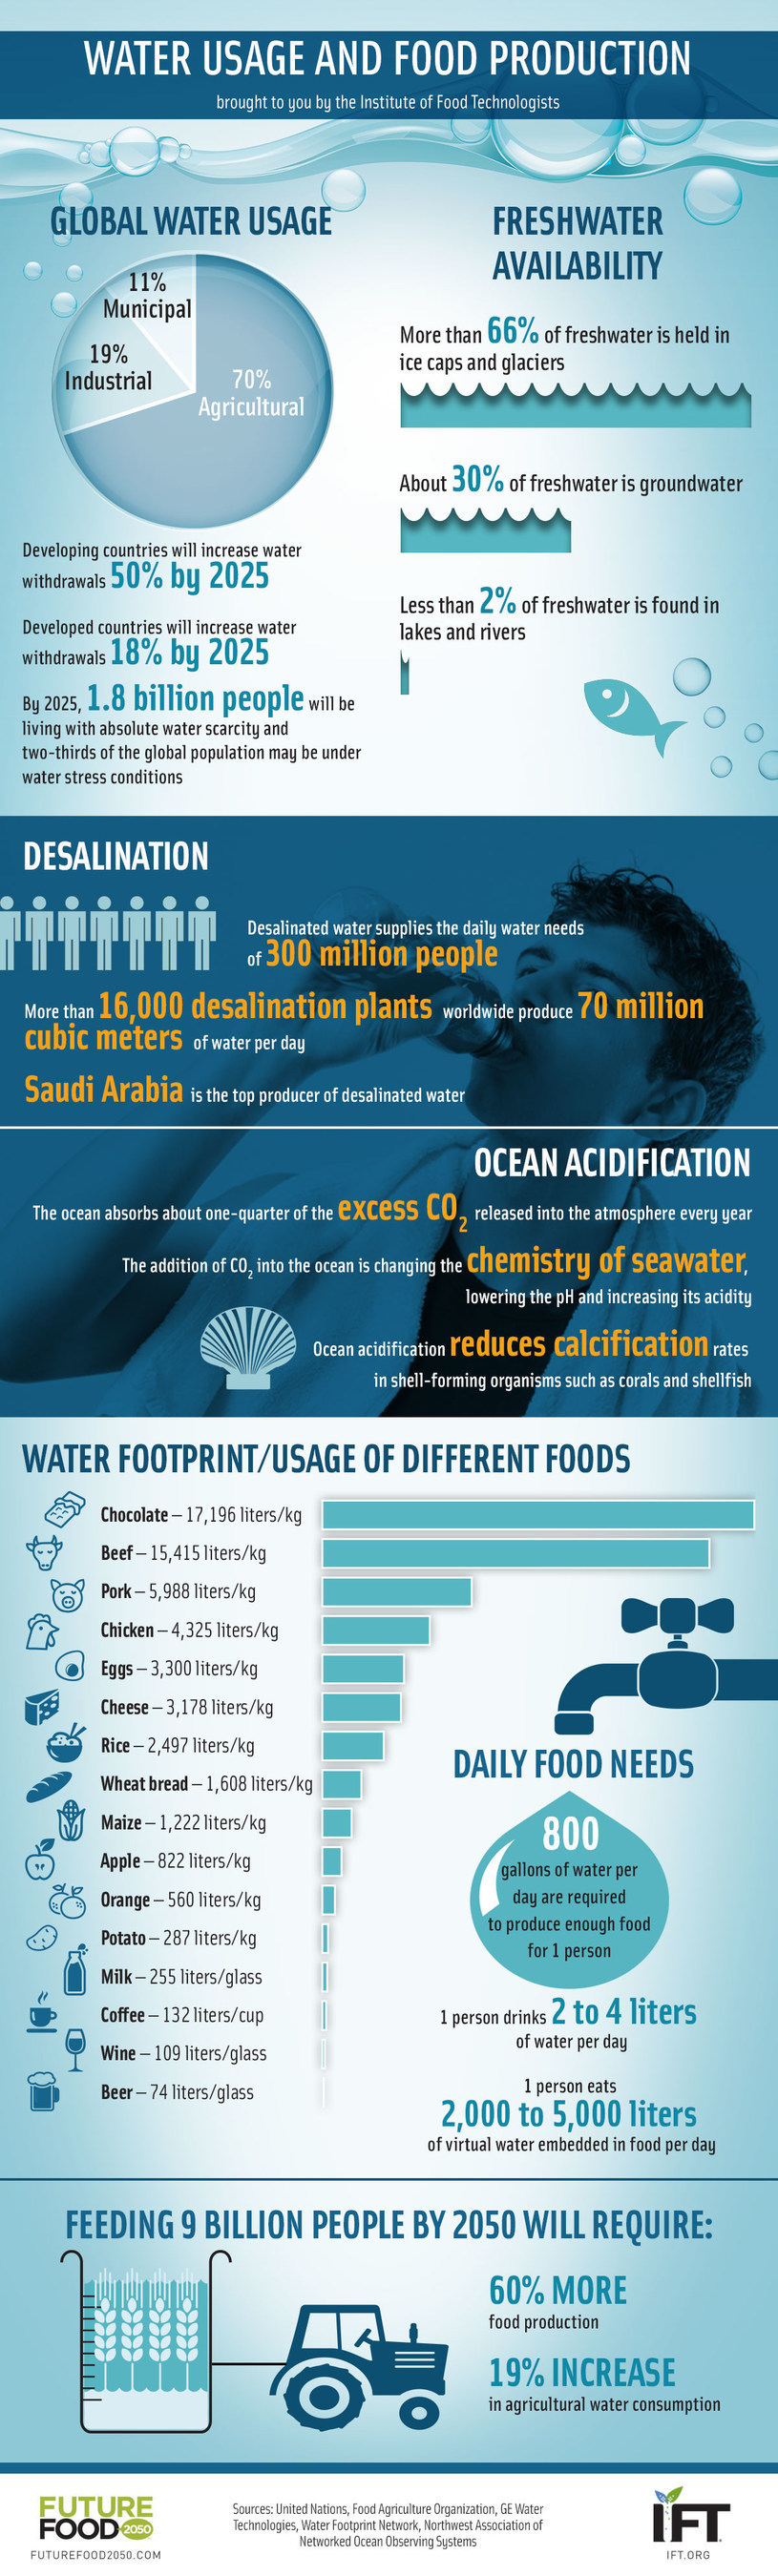 Water Usage and Food Production Infographic